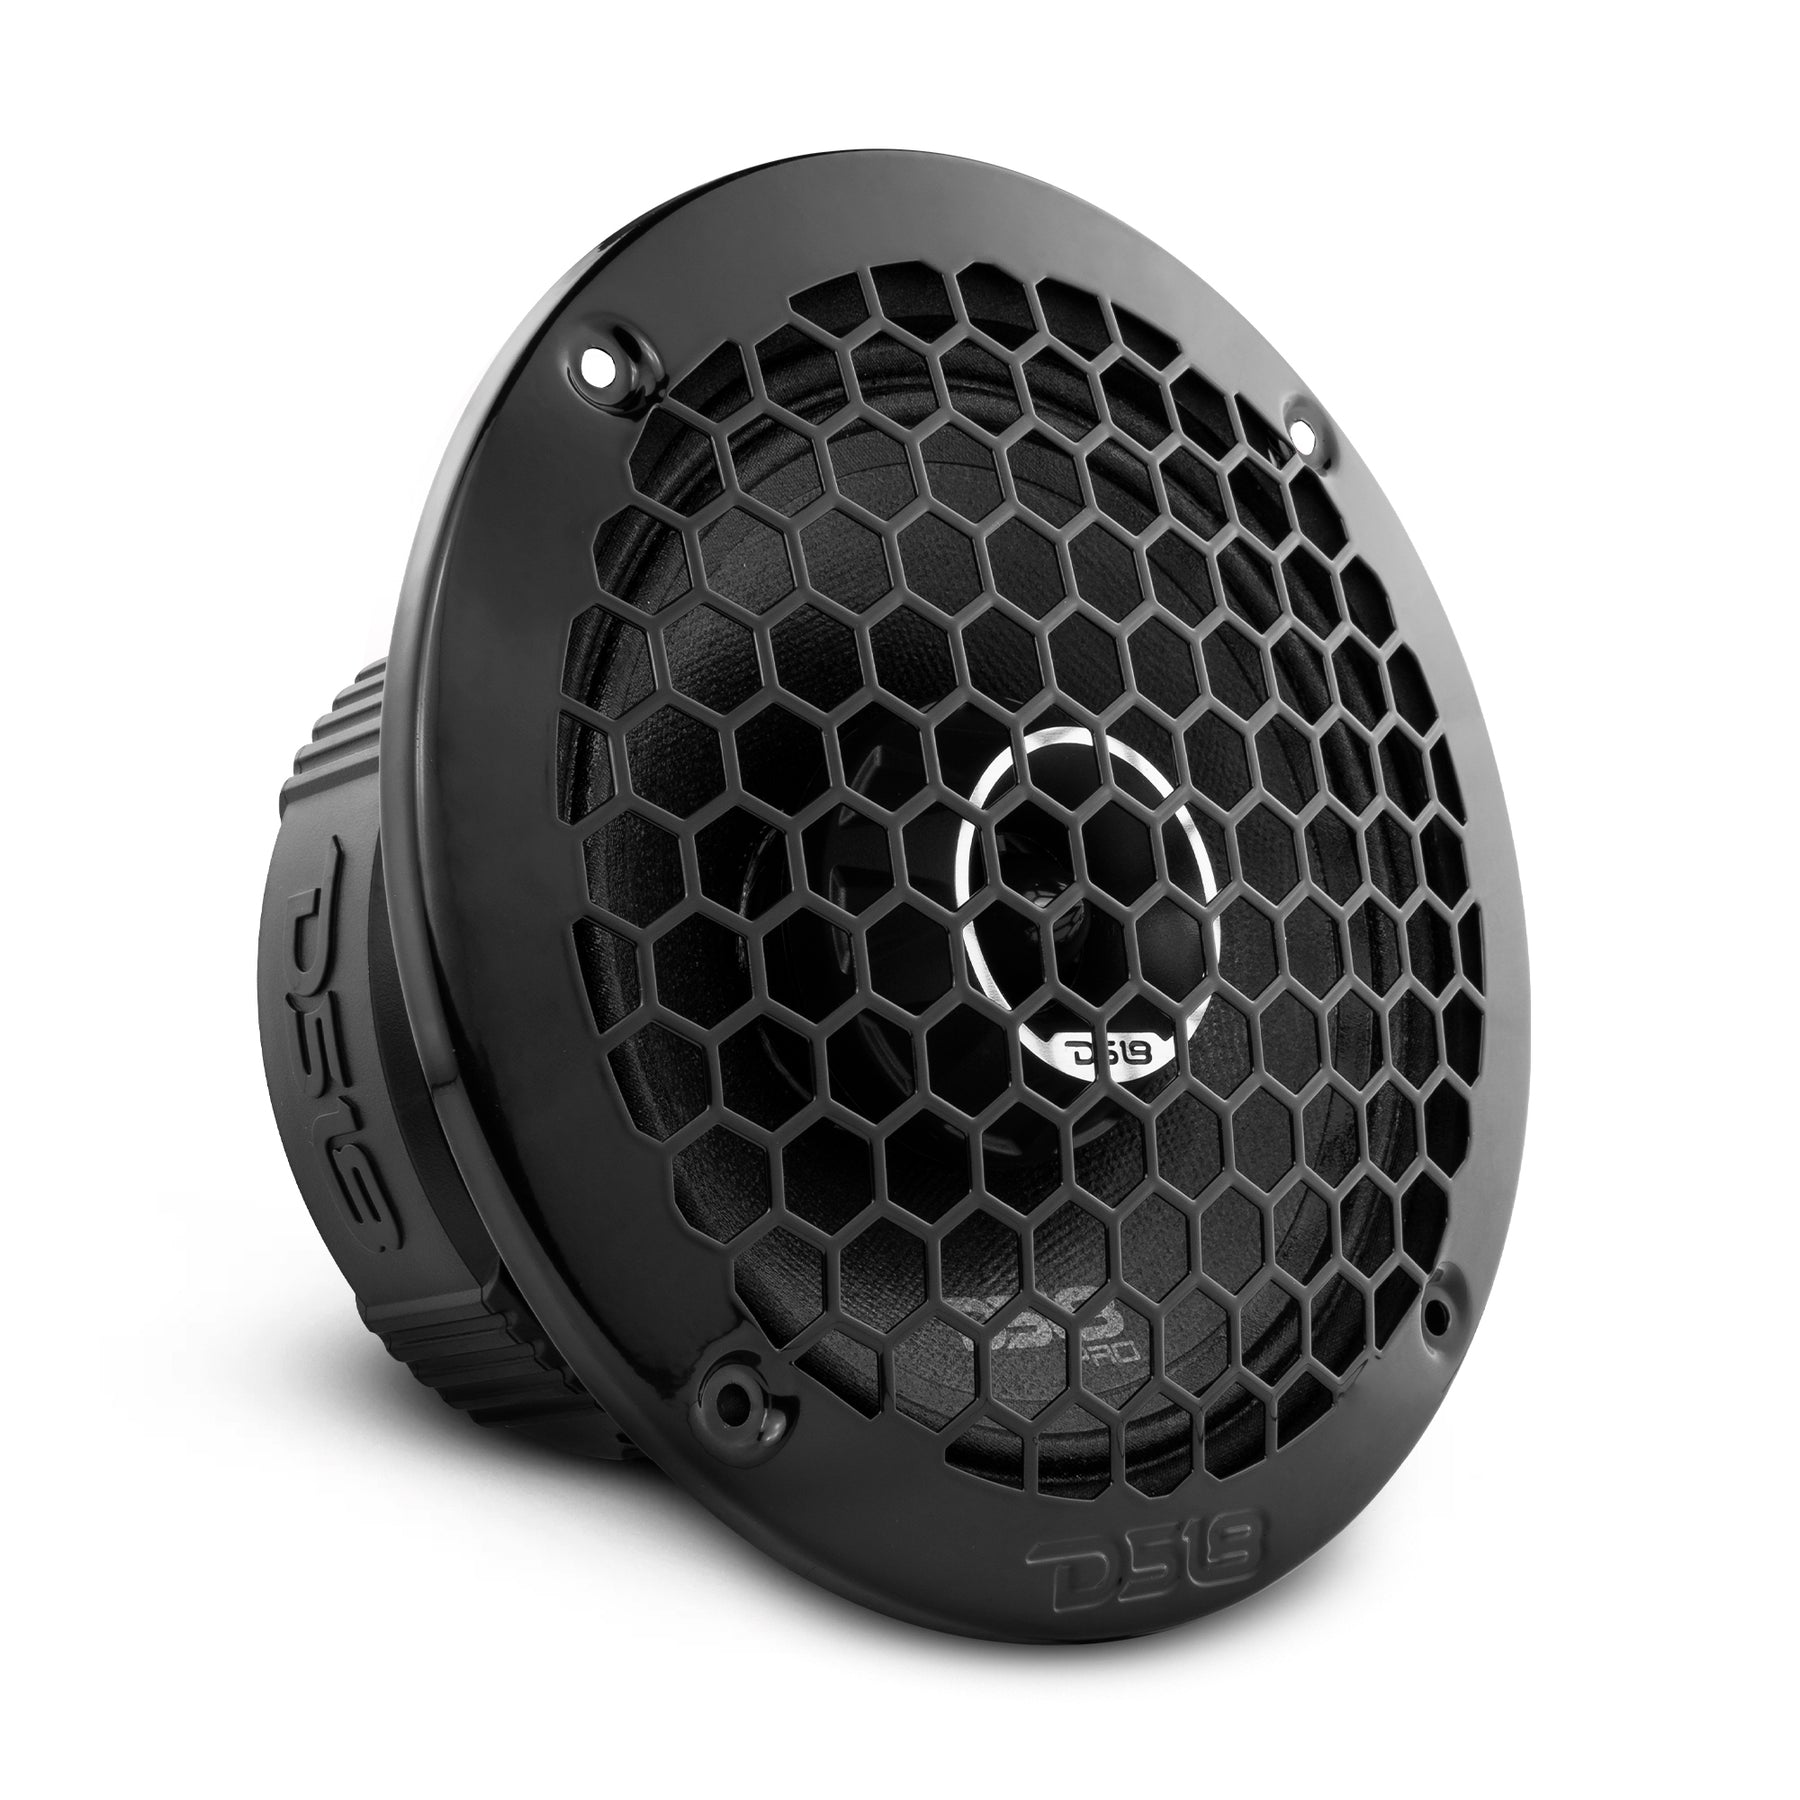 PRO-ZT 8" Coaxial Mid-Range Loudspeaker with Water Resistant Cone Built-in Bullet Tweeter and Grill 275 Watts Rms 4-Ohm